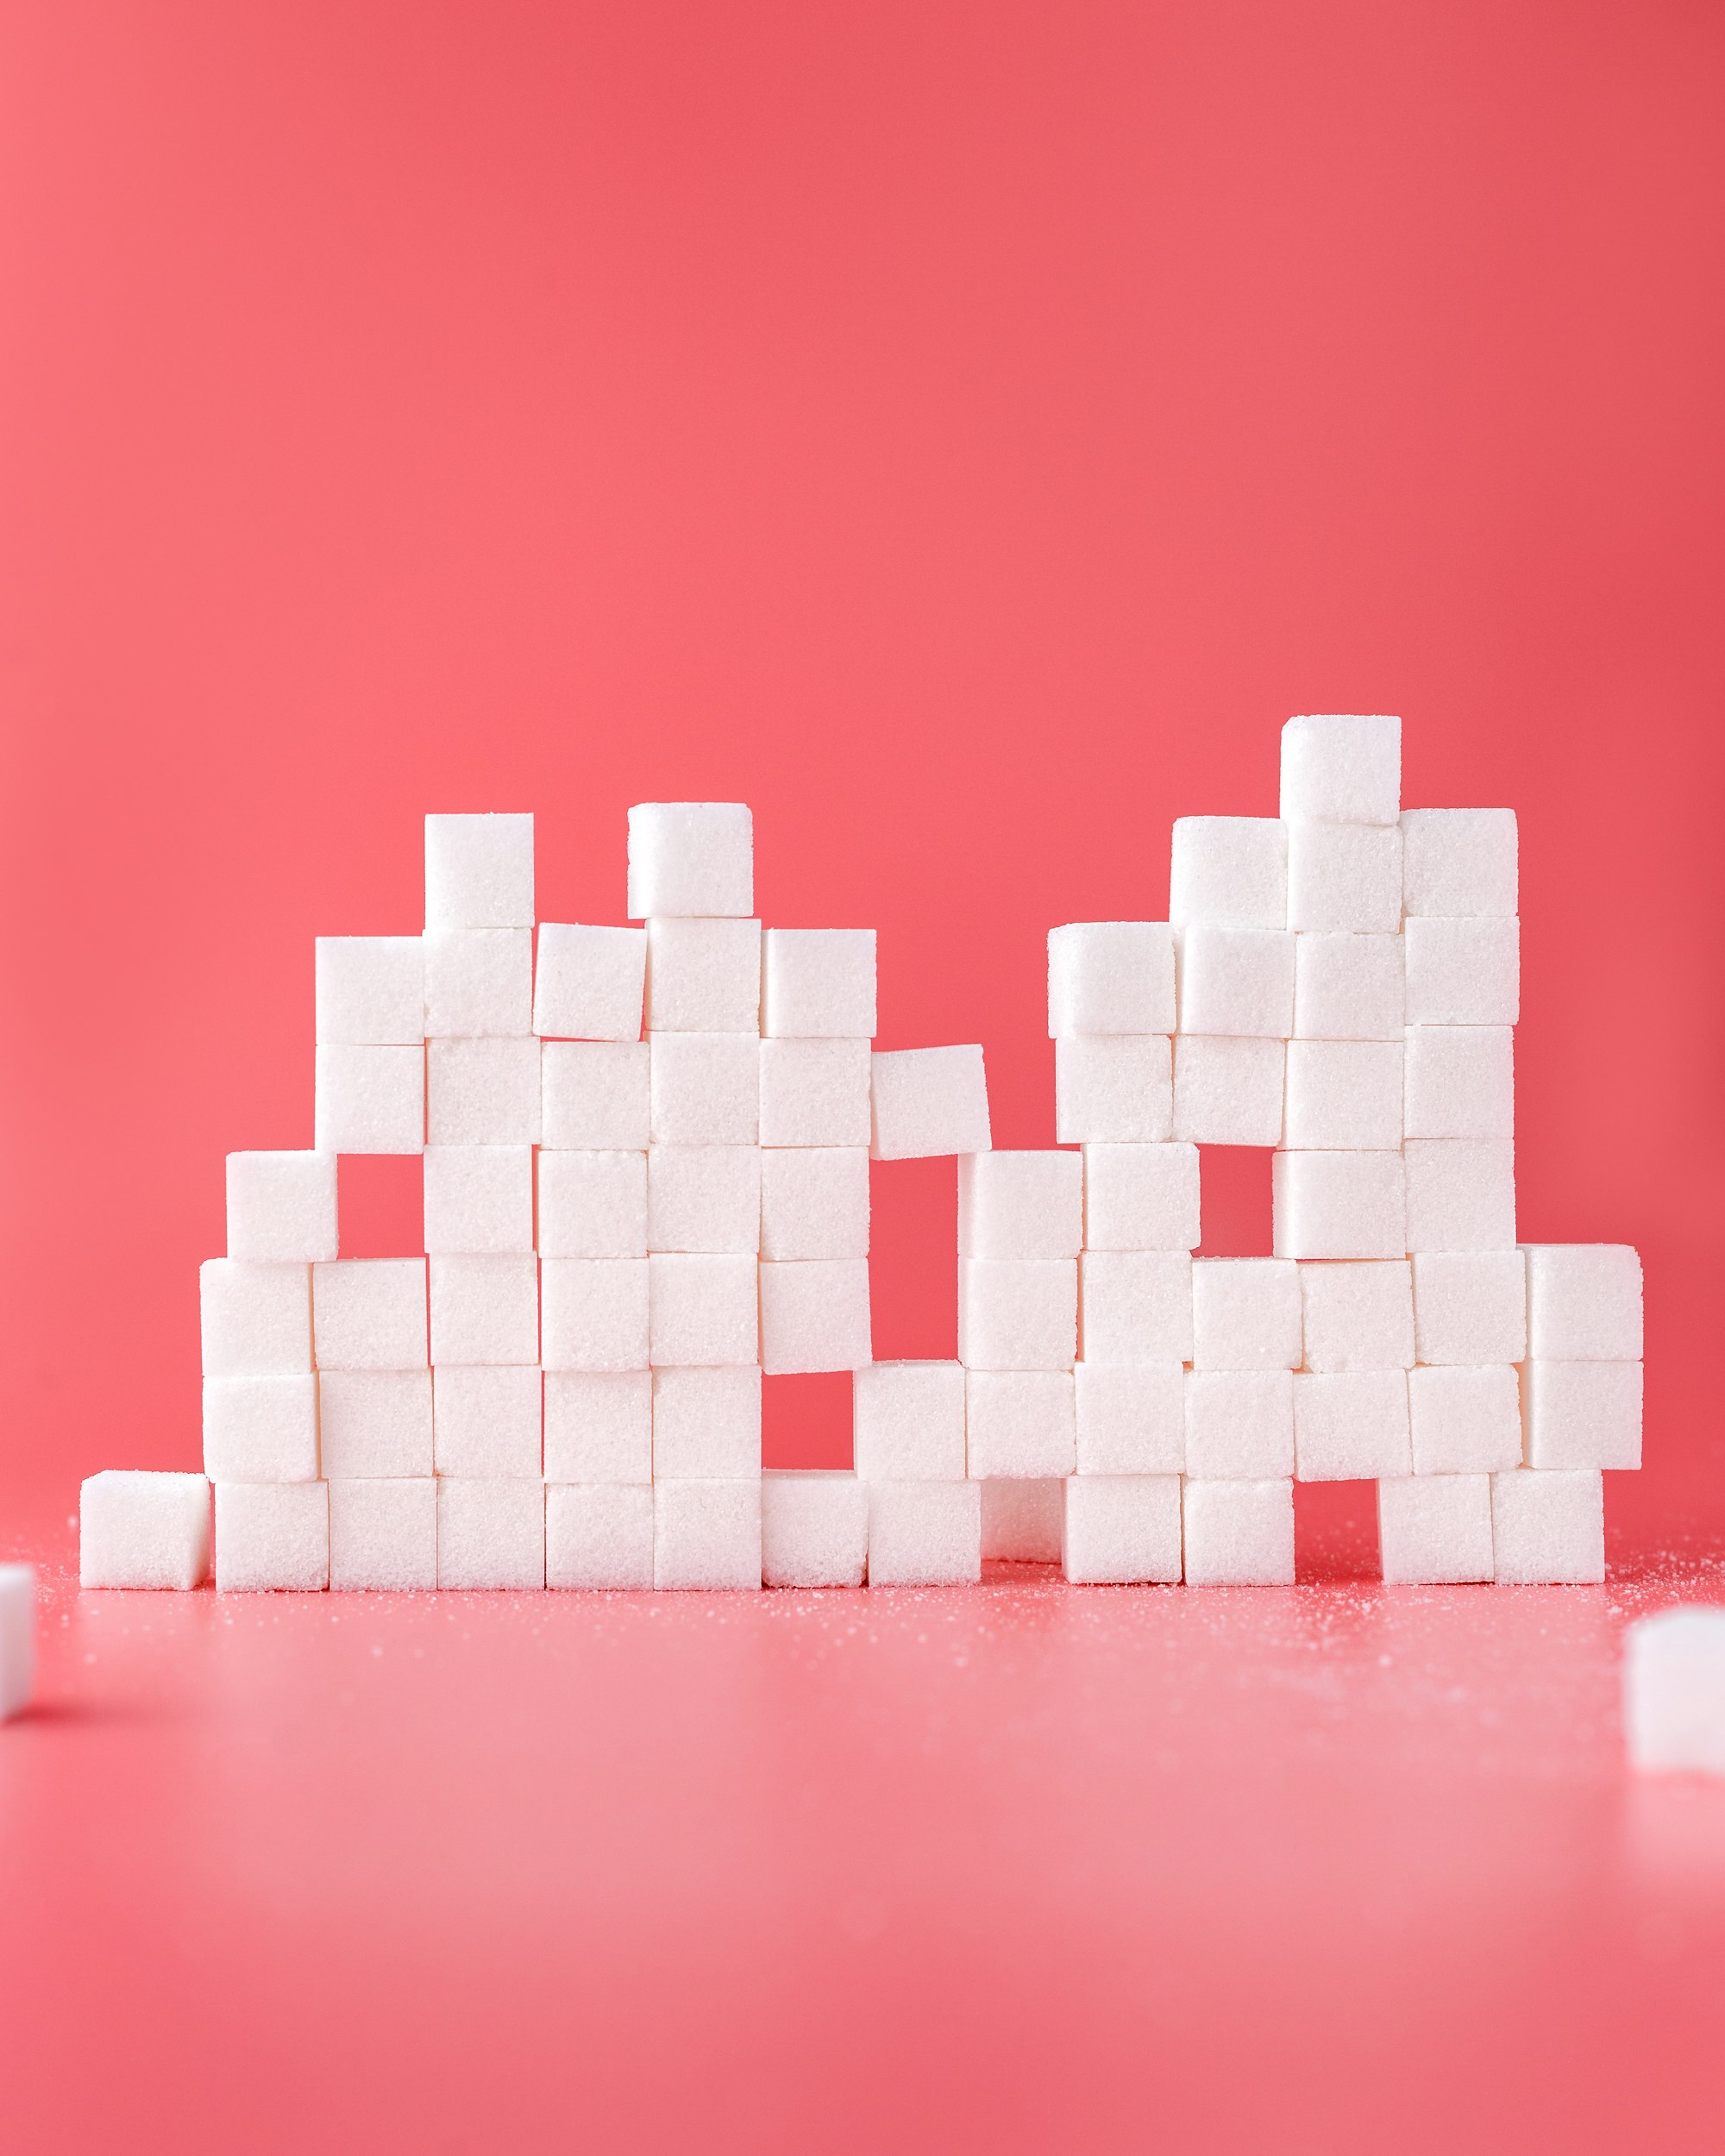 Israel's DouxMatok partners with Canadian sugar giant to sweeten up your low sugar options